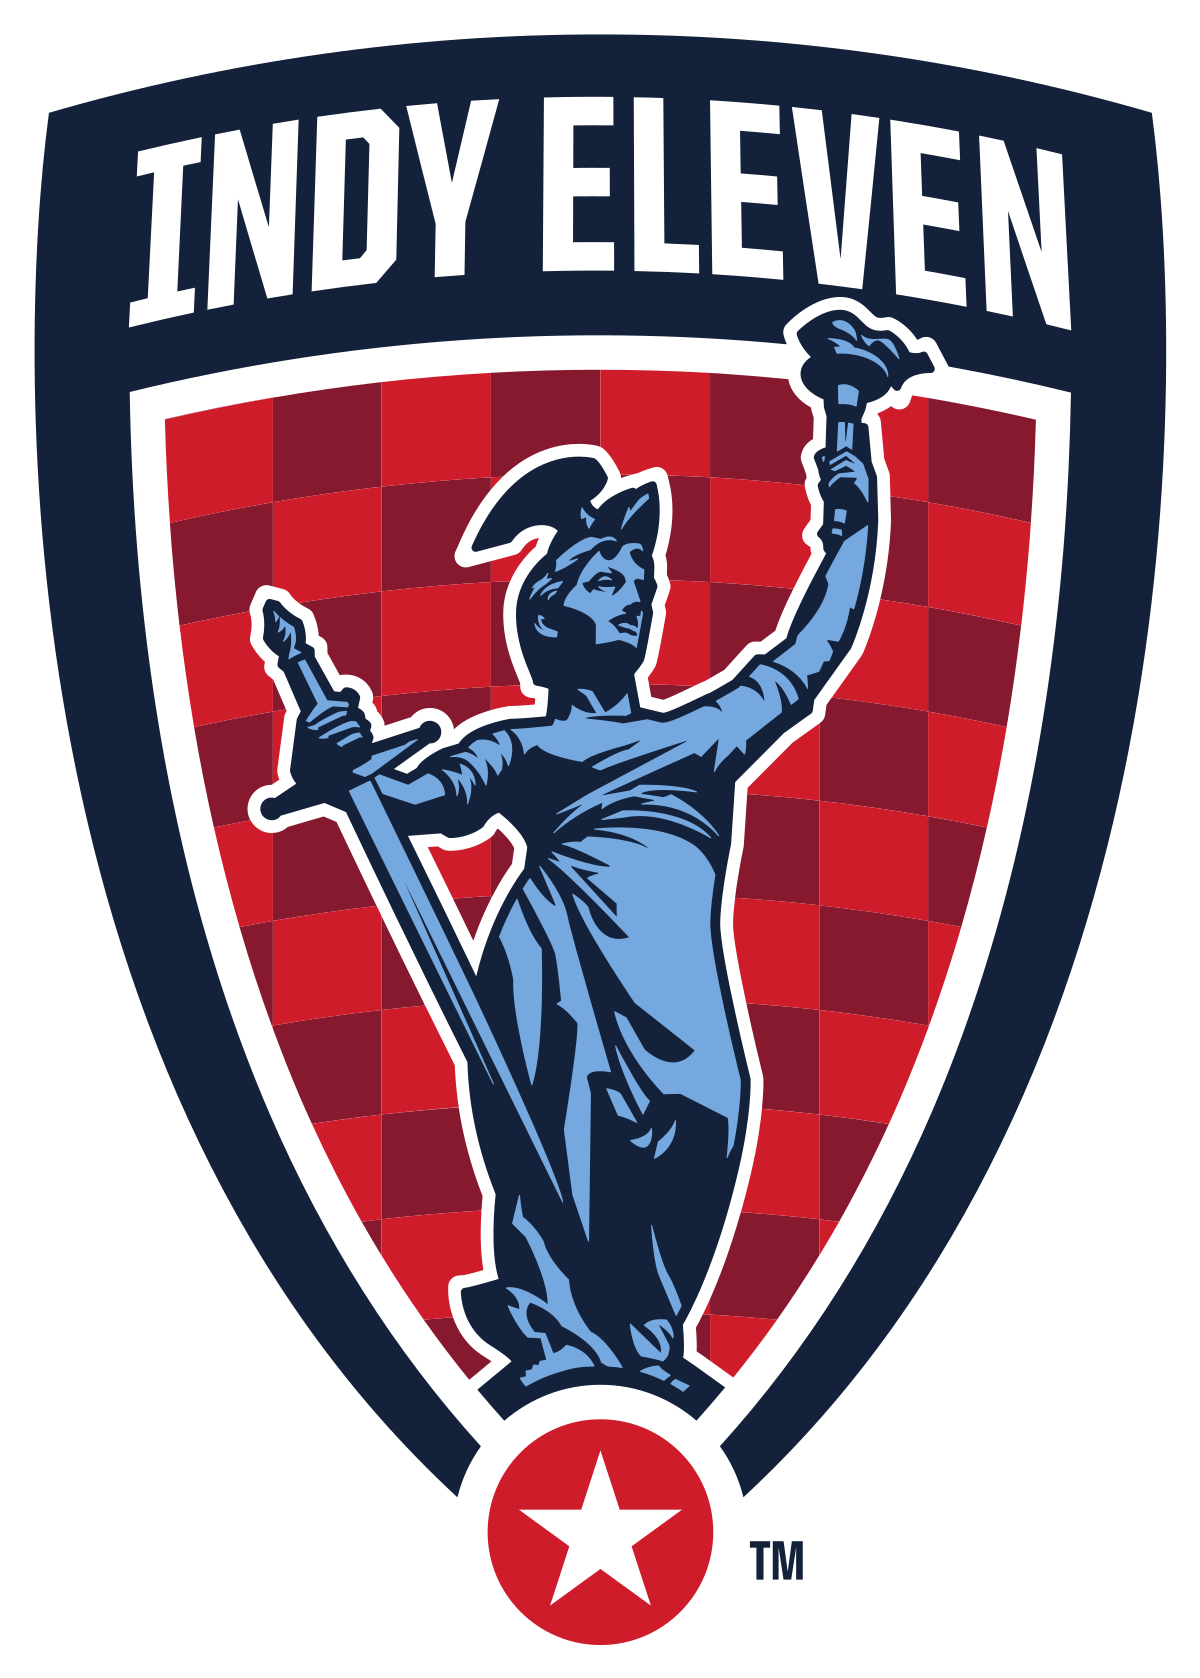 indy eleven crest